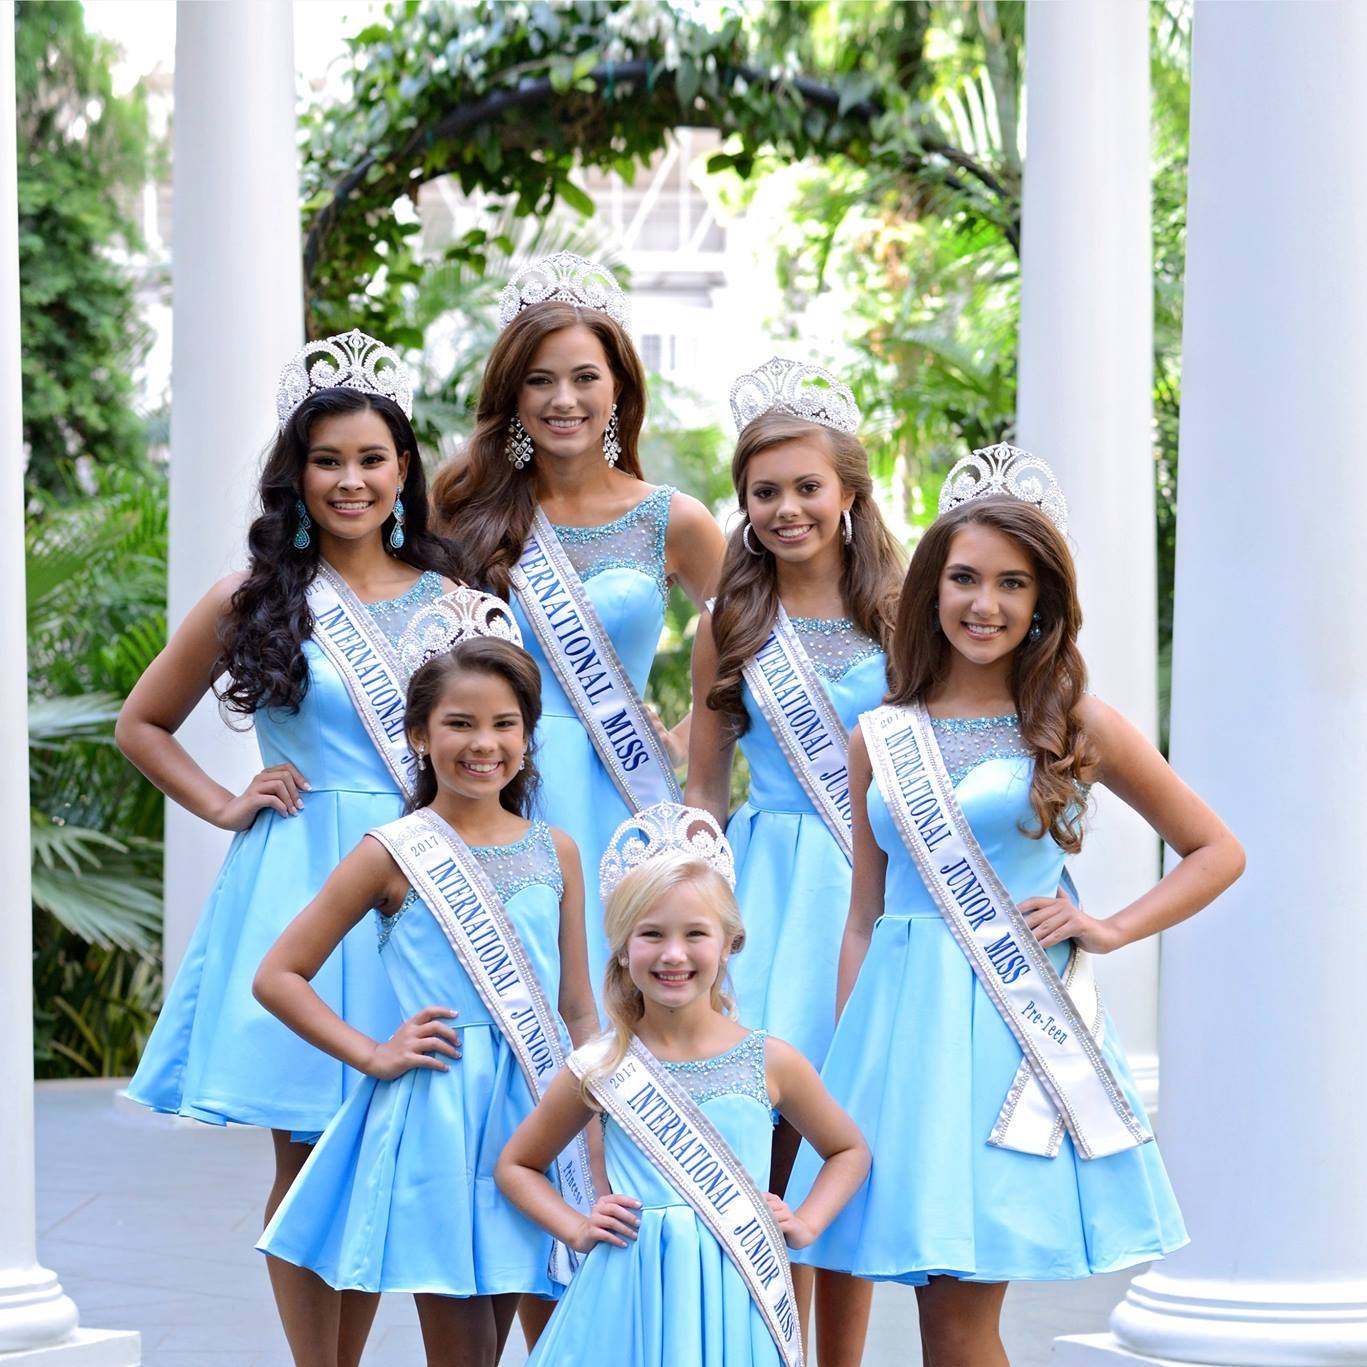 Nudist jr miss pageant - 🧡 Index of /wp-content/gallery/miss-junior-flagl....